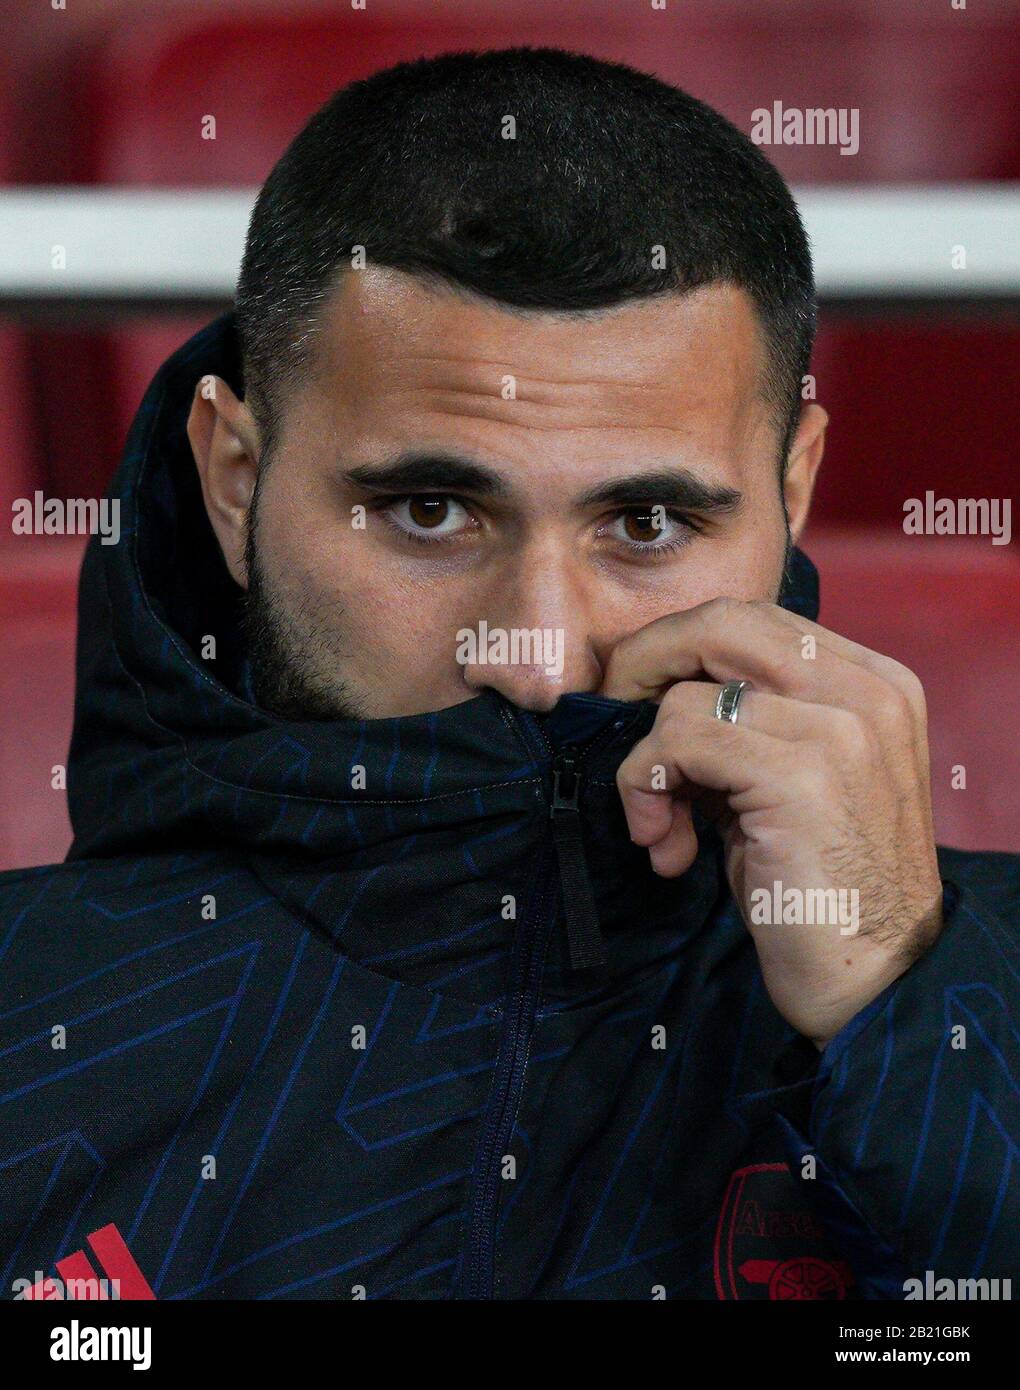 London, UK. 27th Feb, 2020. Sead Kolašinac of Arsenal pre match during the UEFA Europa League 2nd leg match between Arsenal and Olympiacos at the Emirates Stadium, London, England on 27 February 2020. Photo by Andy Rowland. Credit: PRiME Media Images/Alamy Live News Stock Photo